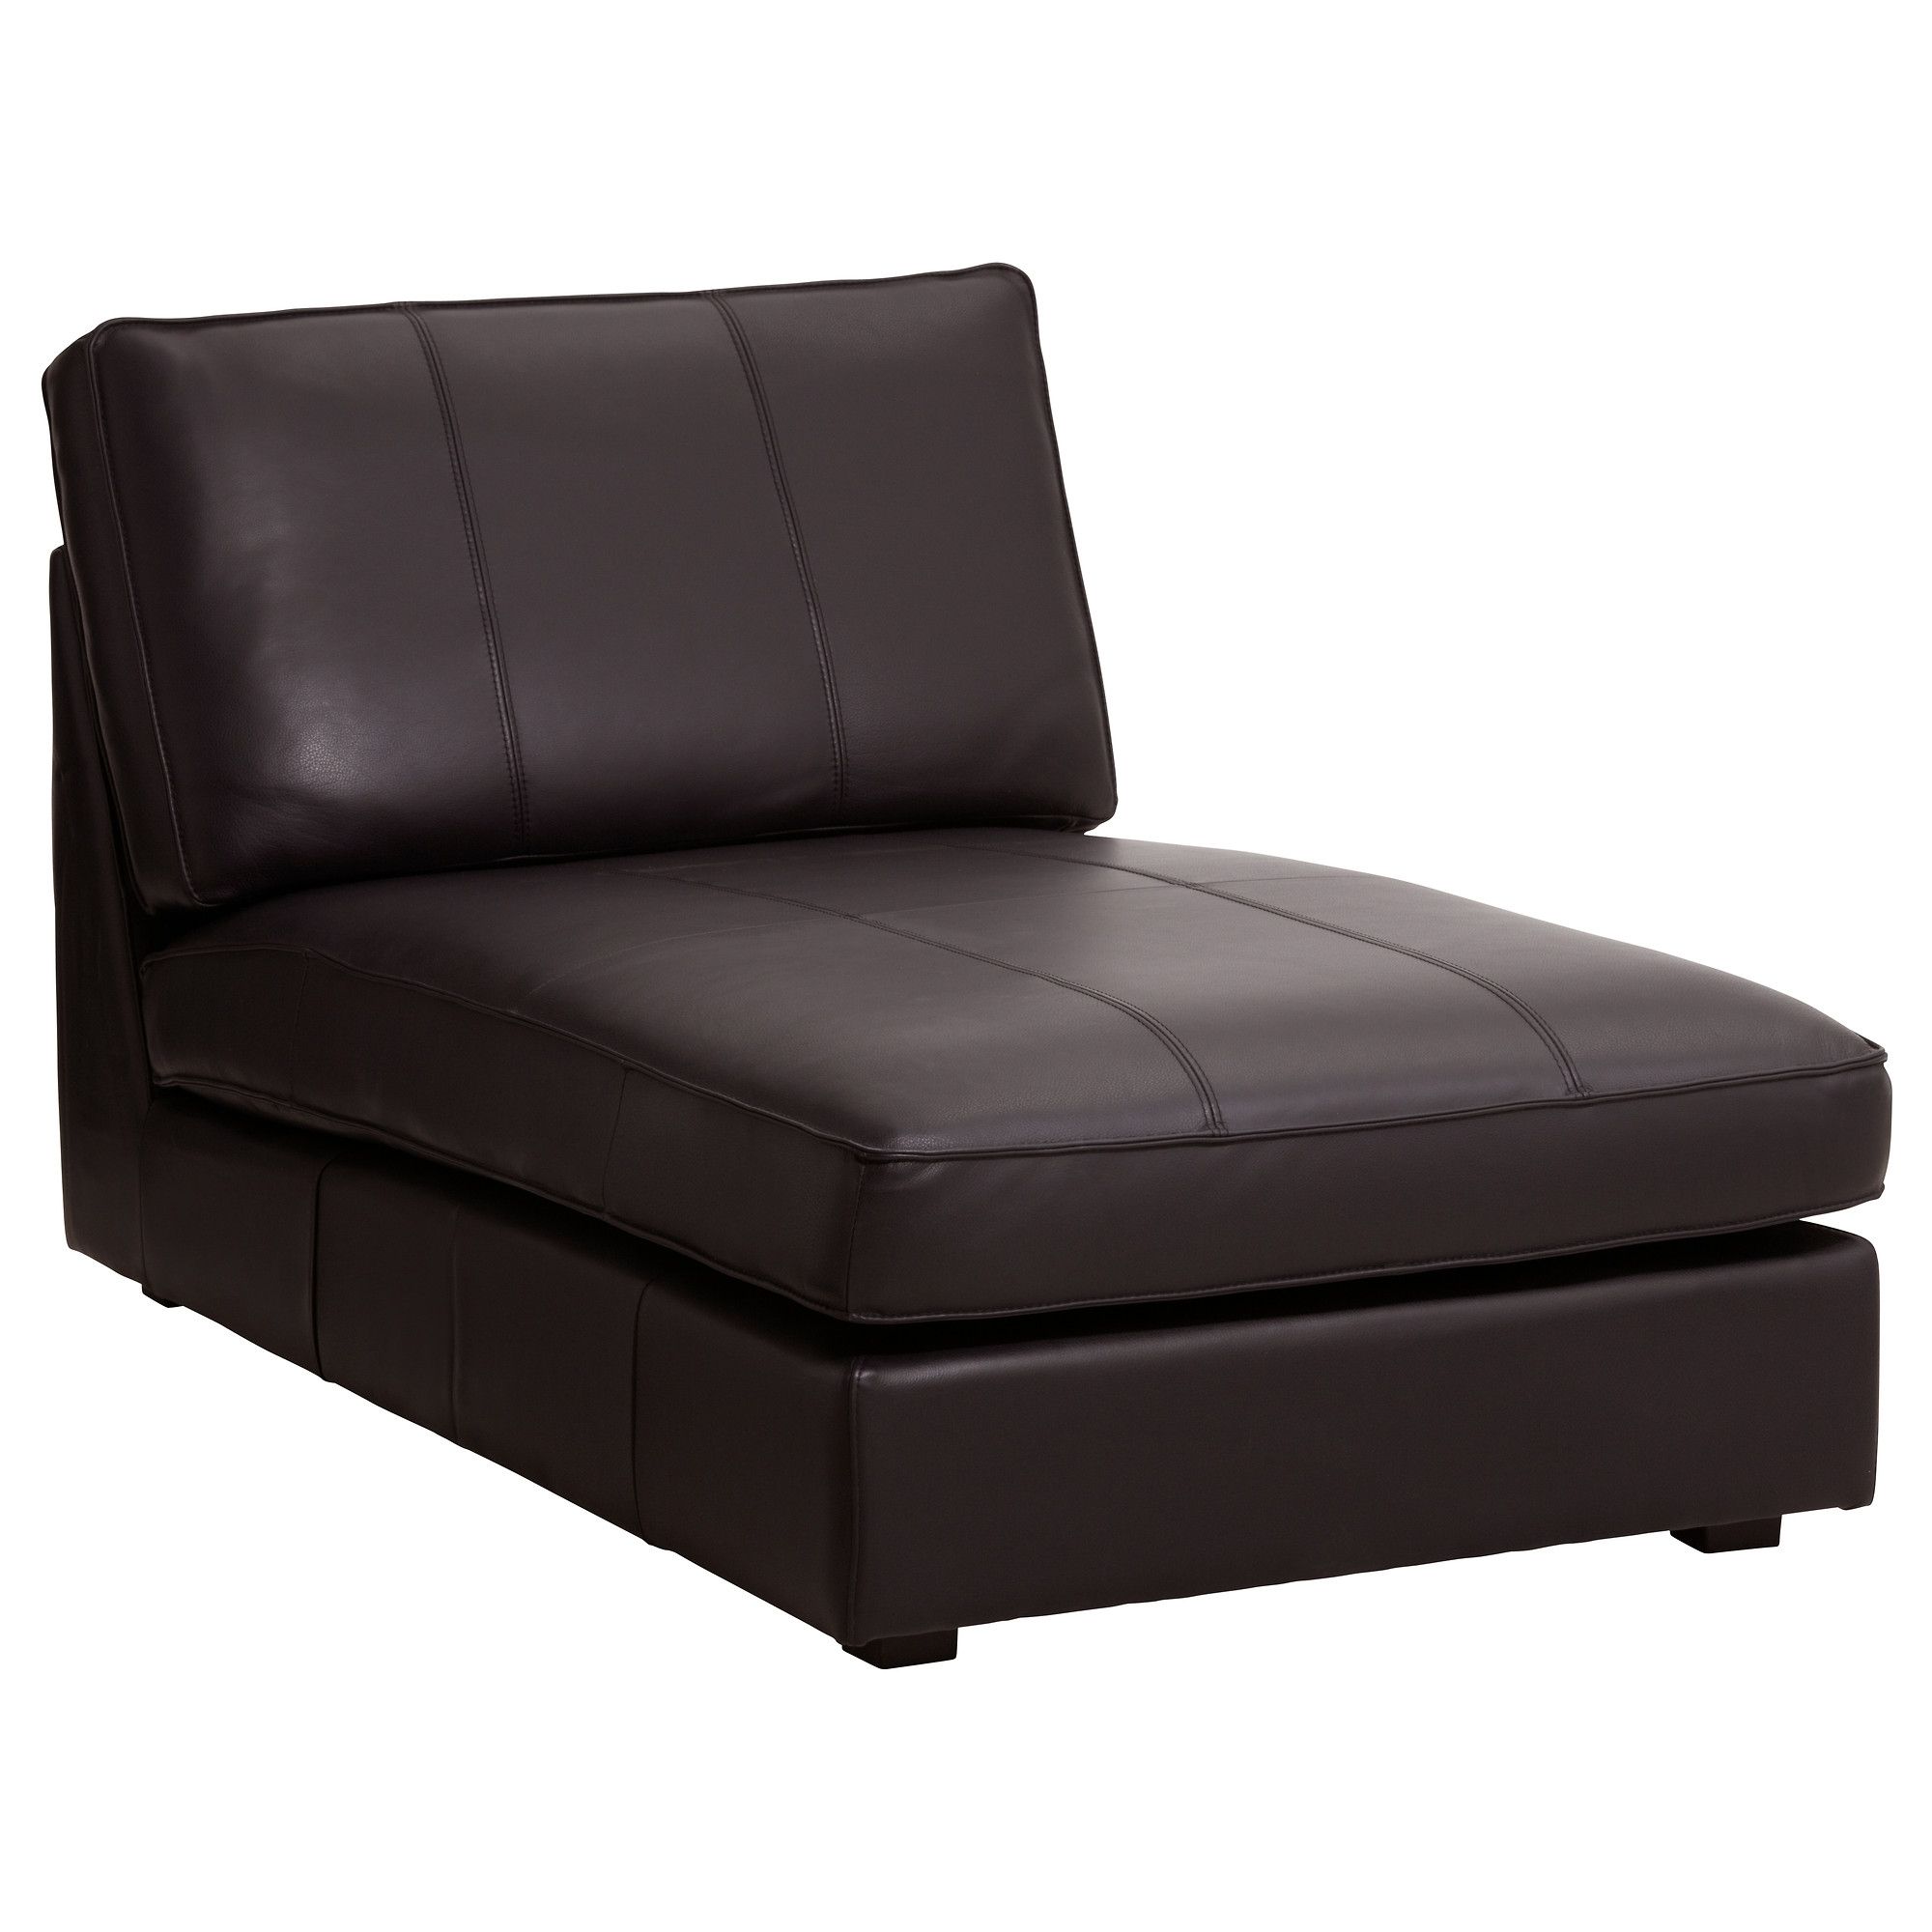 Most Current Kivik Chaise – Grann/bomstad Dark Brown – Ikea With Regard To Black Chaises (View 4 of 15)